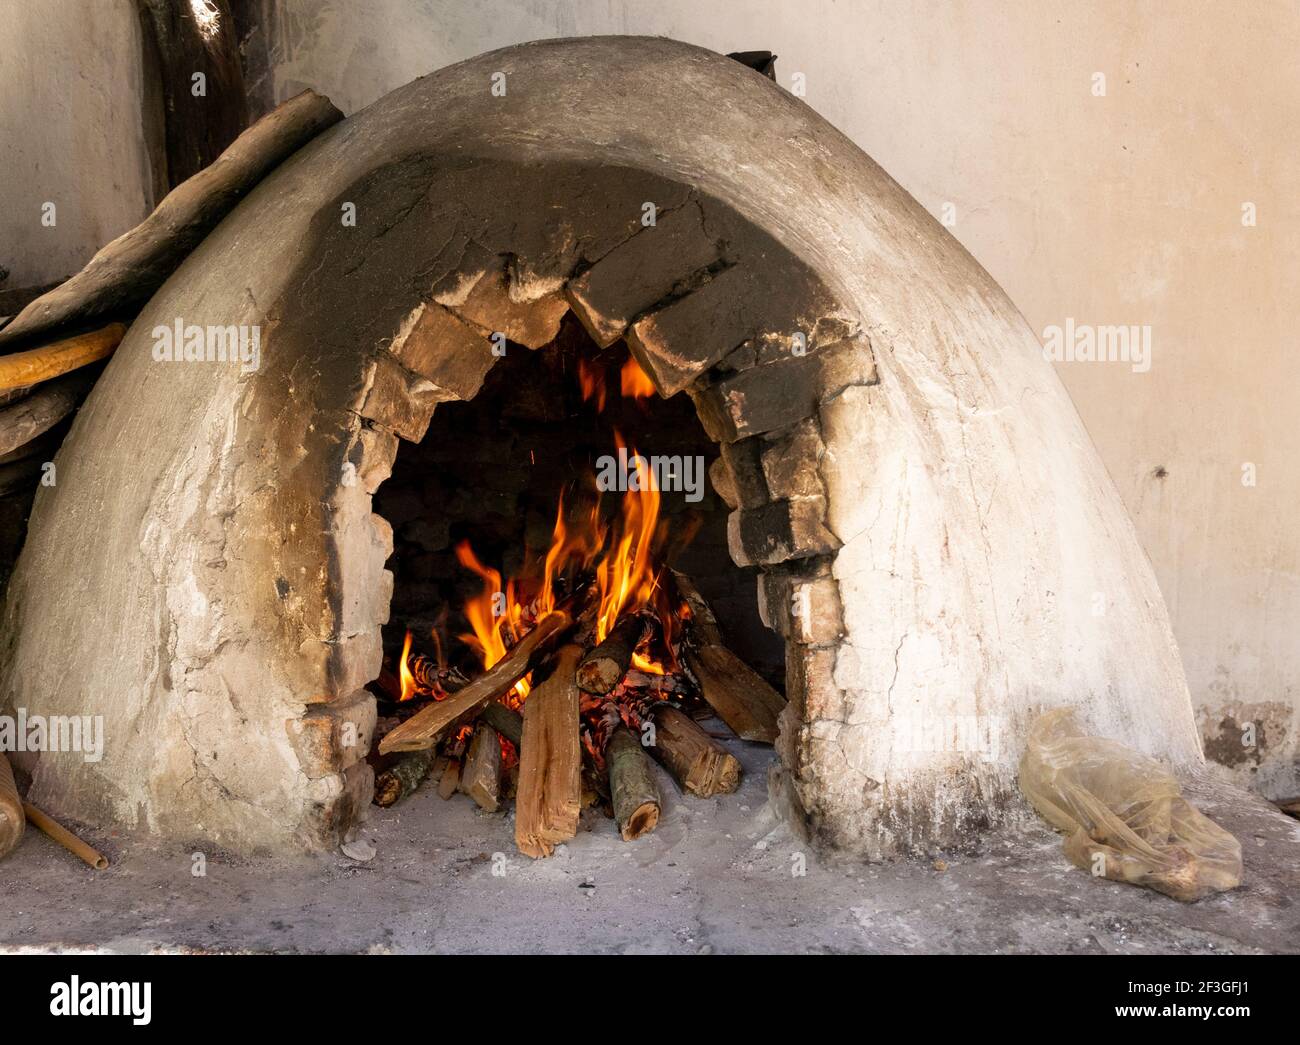 A selective focus of burning firewoods inside an old brick fireplace Stock Photo